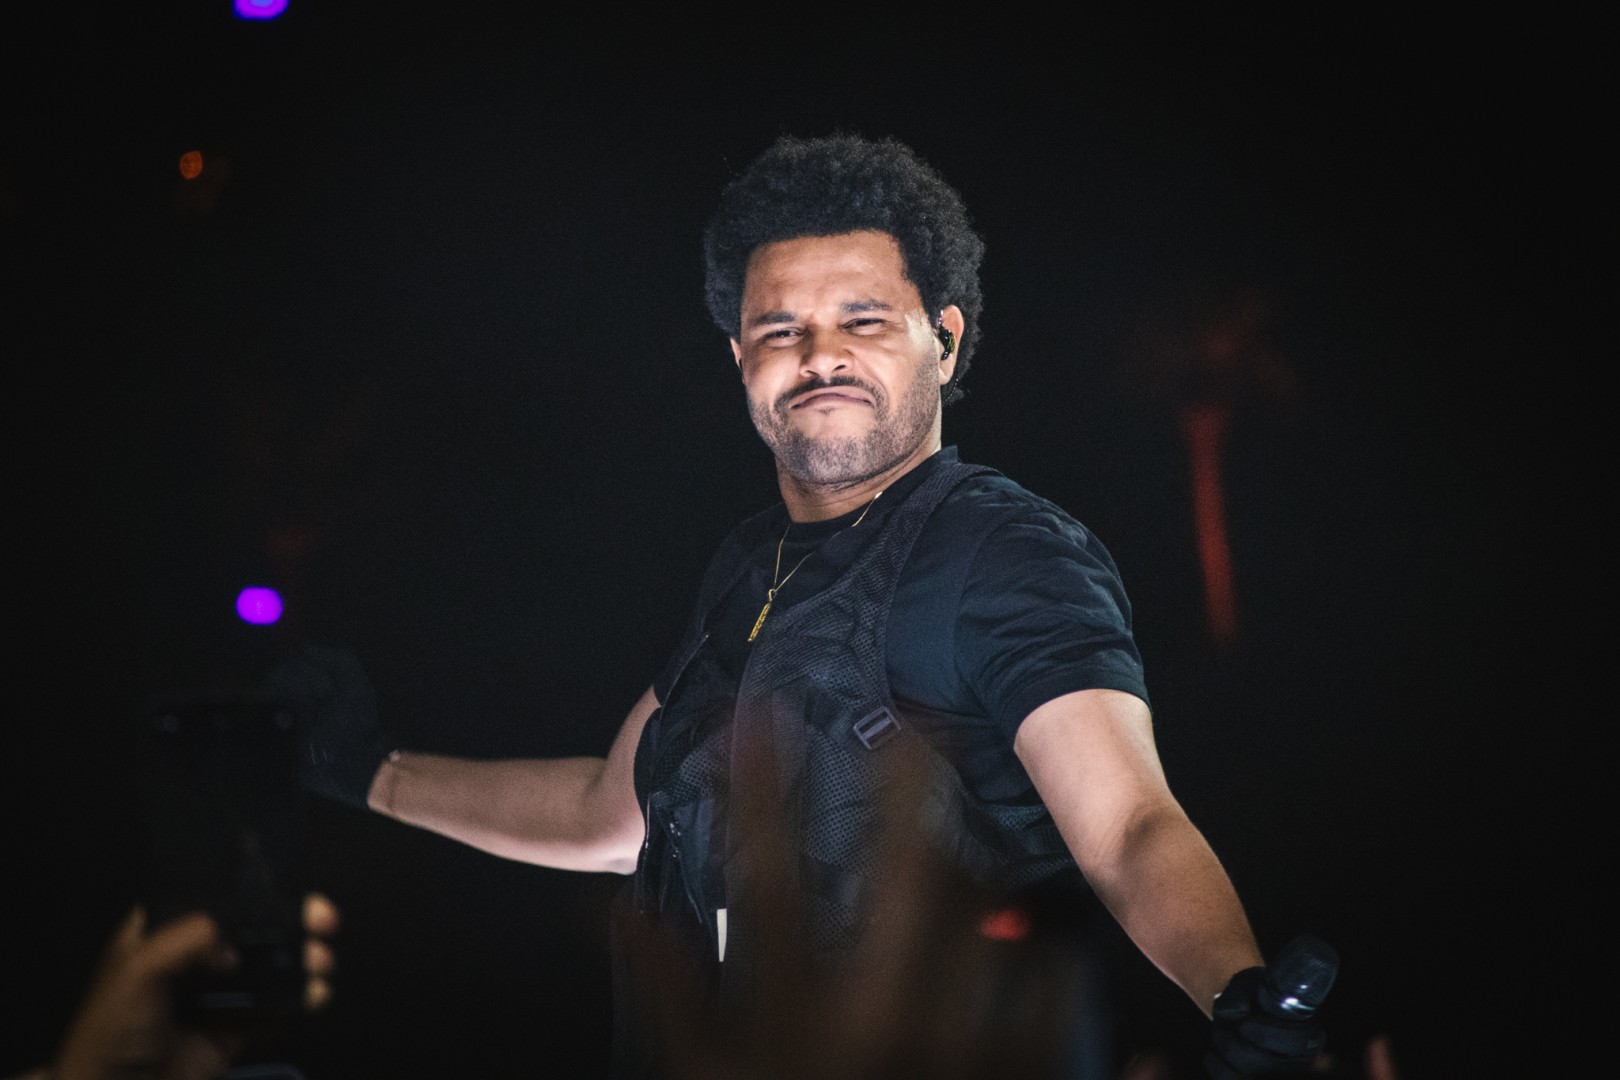 The Weeknd at Empire Polo Club in Indio on April 18, 2022 (039db81045)